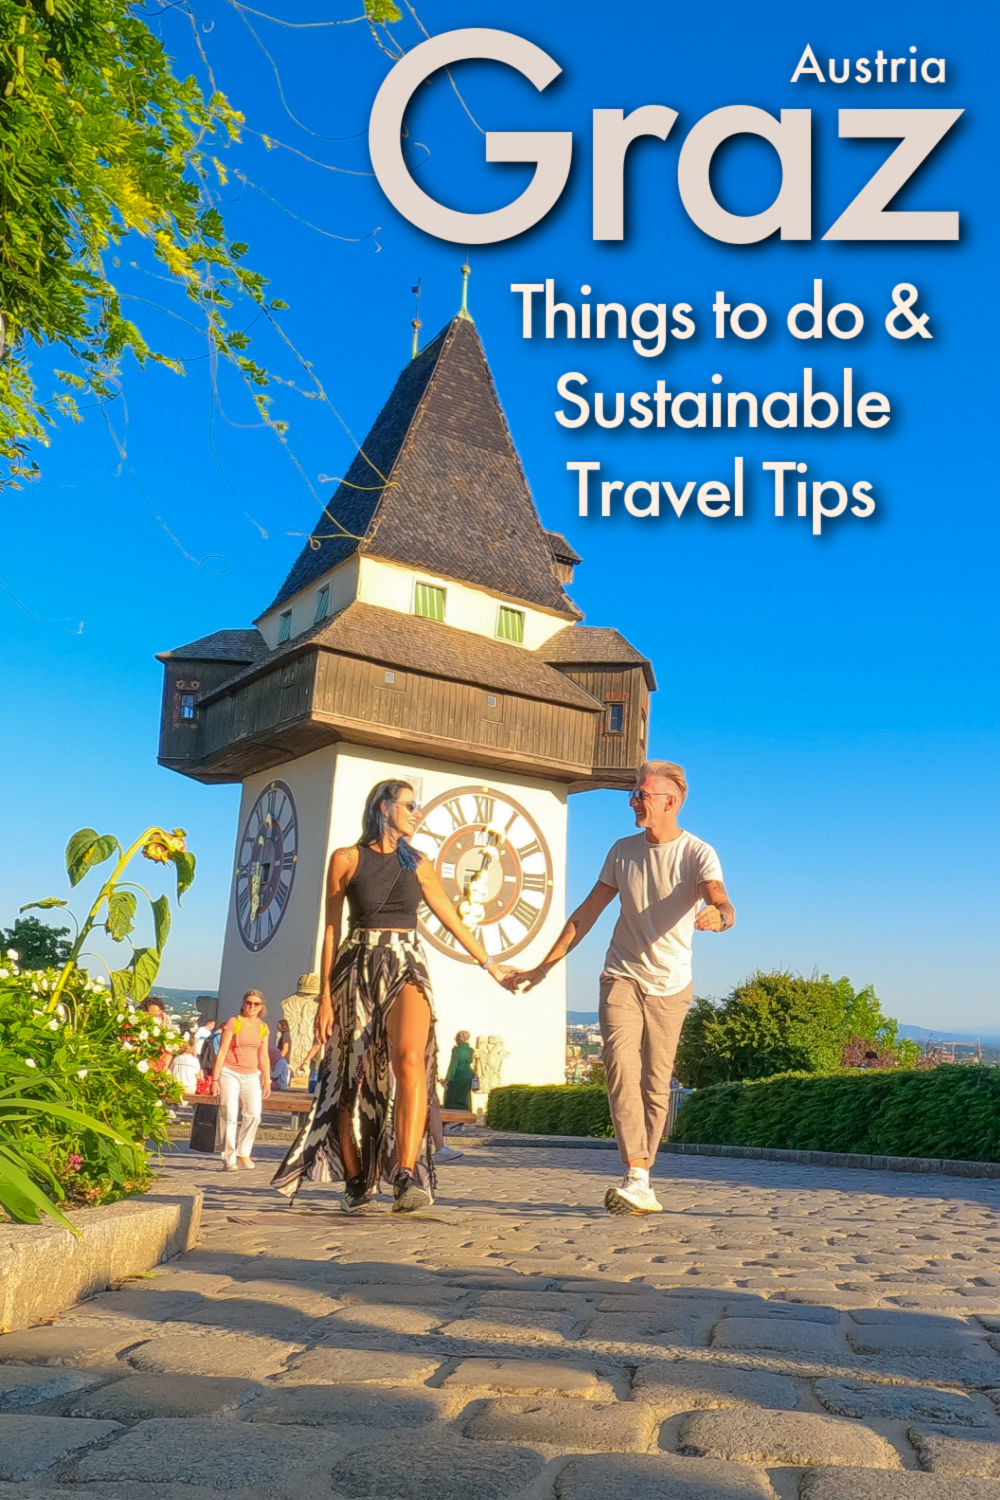 Your sustainable travel guide to Graz, Austria. Things to do in Graz, places to eat, shop and hotels for conscious travelers. How to responsibly travel to Graz and other destinations. 